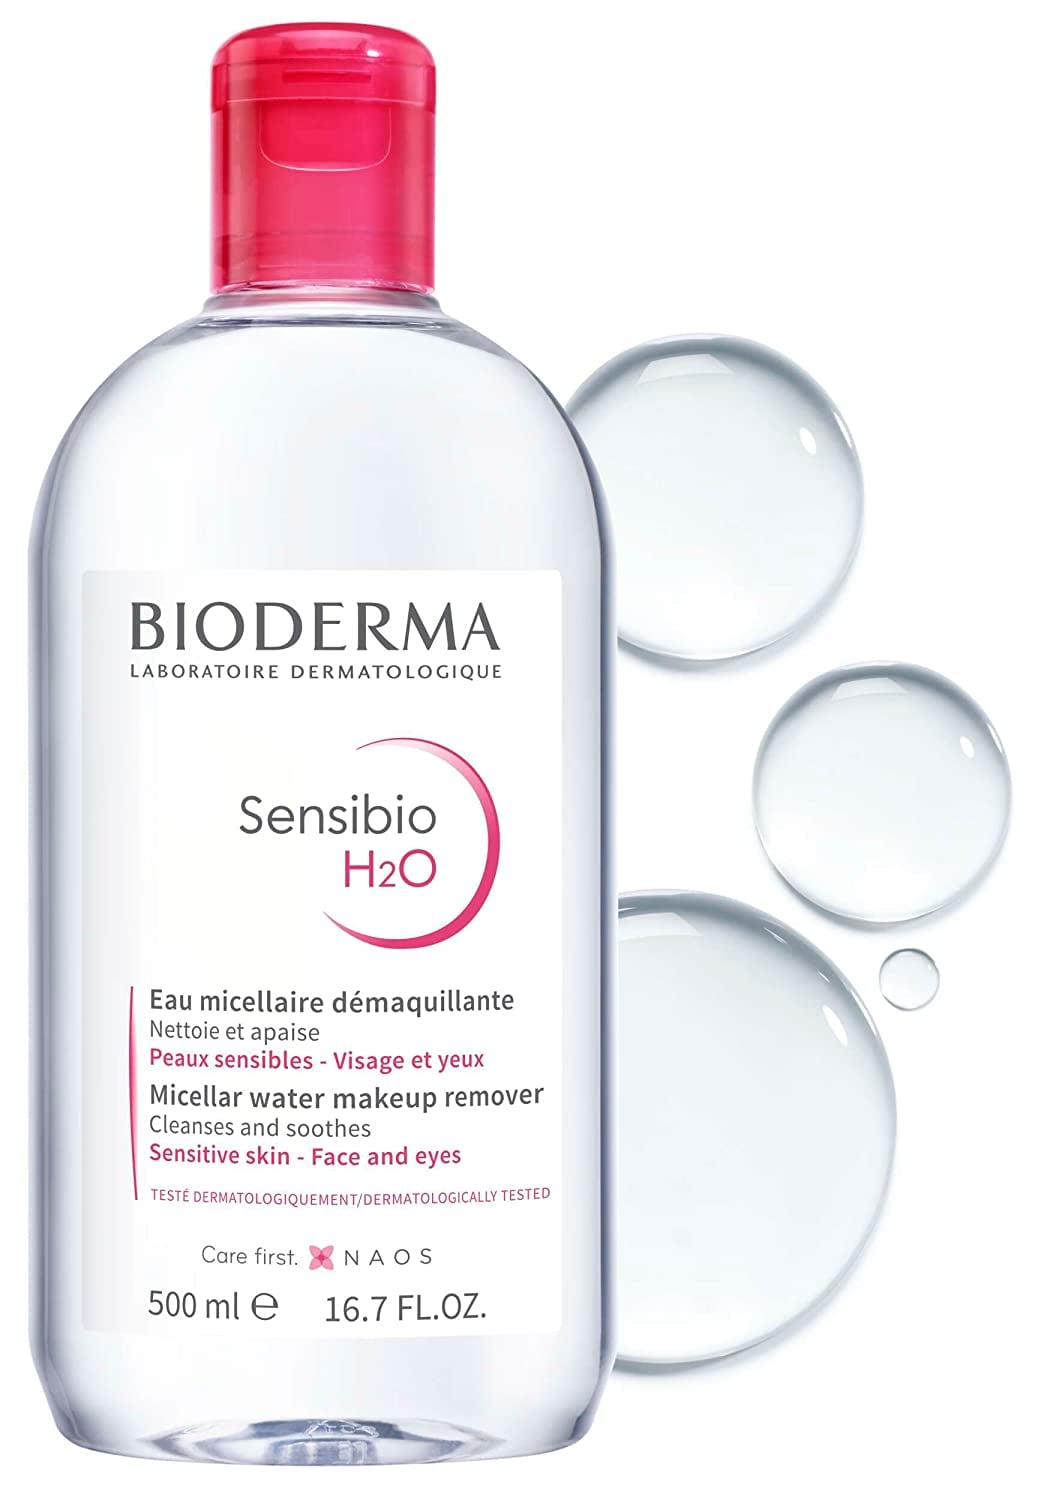 Best Prime Day Beauty Deal on a Micellar Water